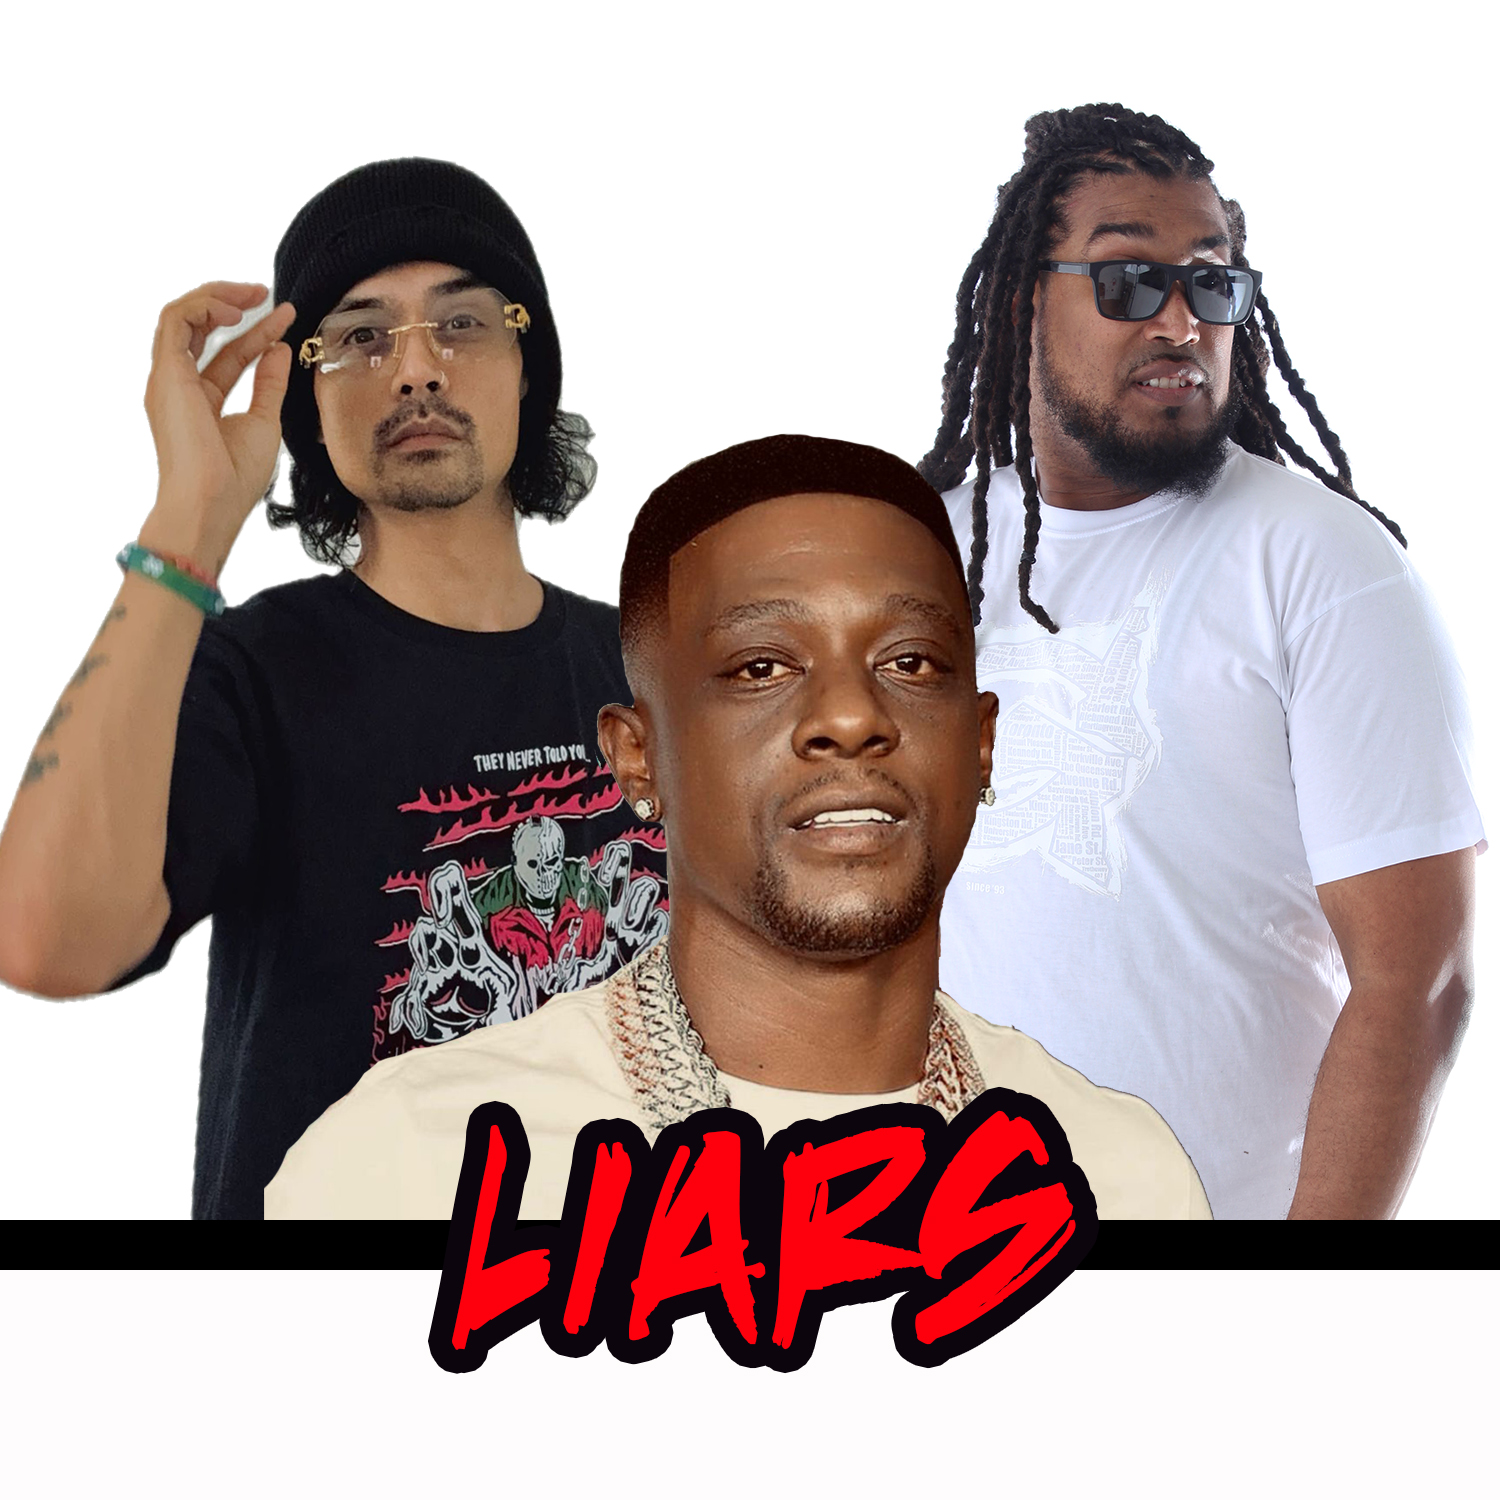 “Liars” by Half Deezy ft. Boosie BadAzz and DT the Artist: A Global Collaboration of Independent Powerhouses